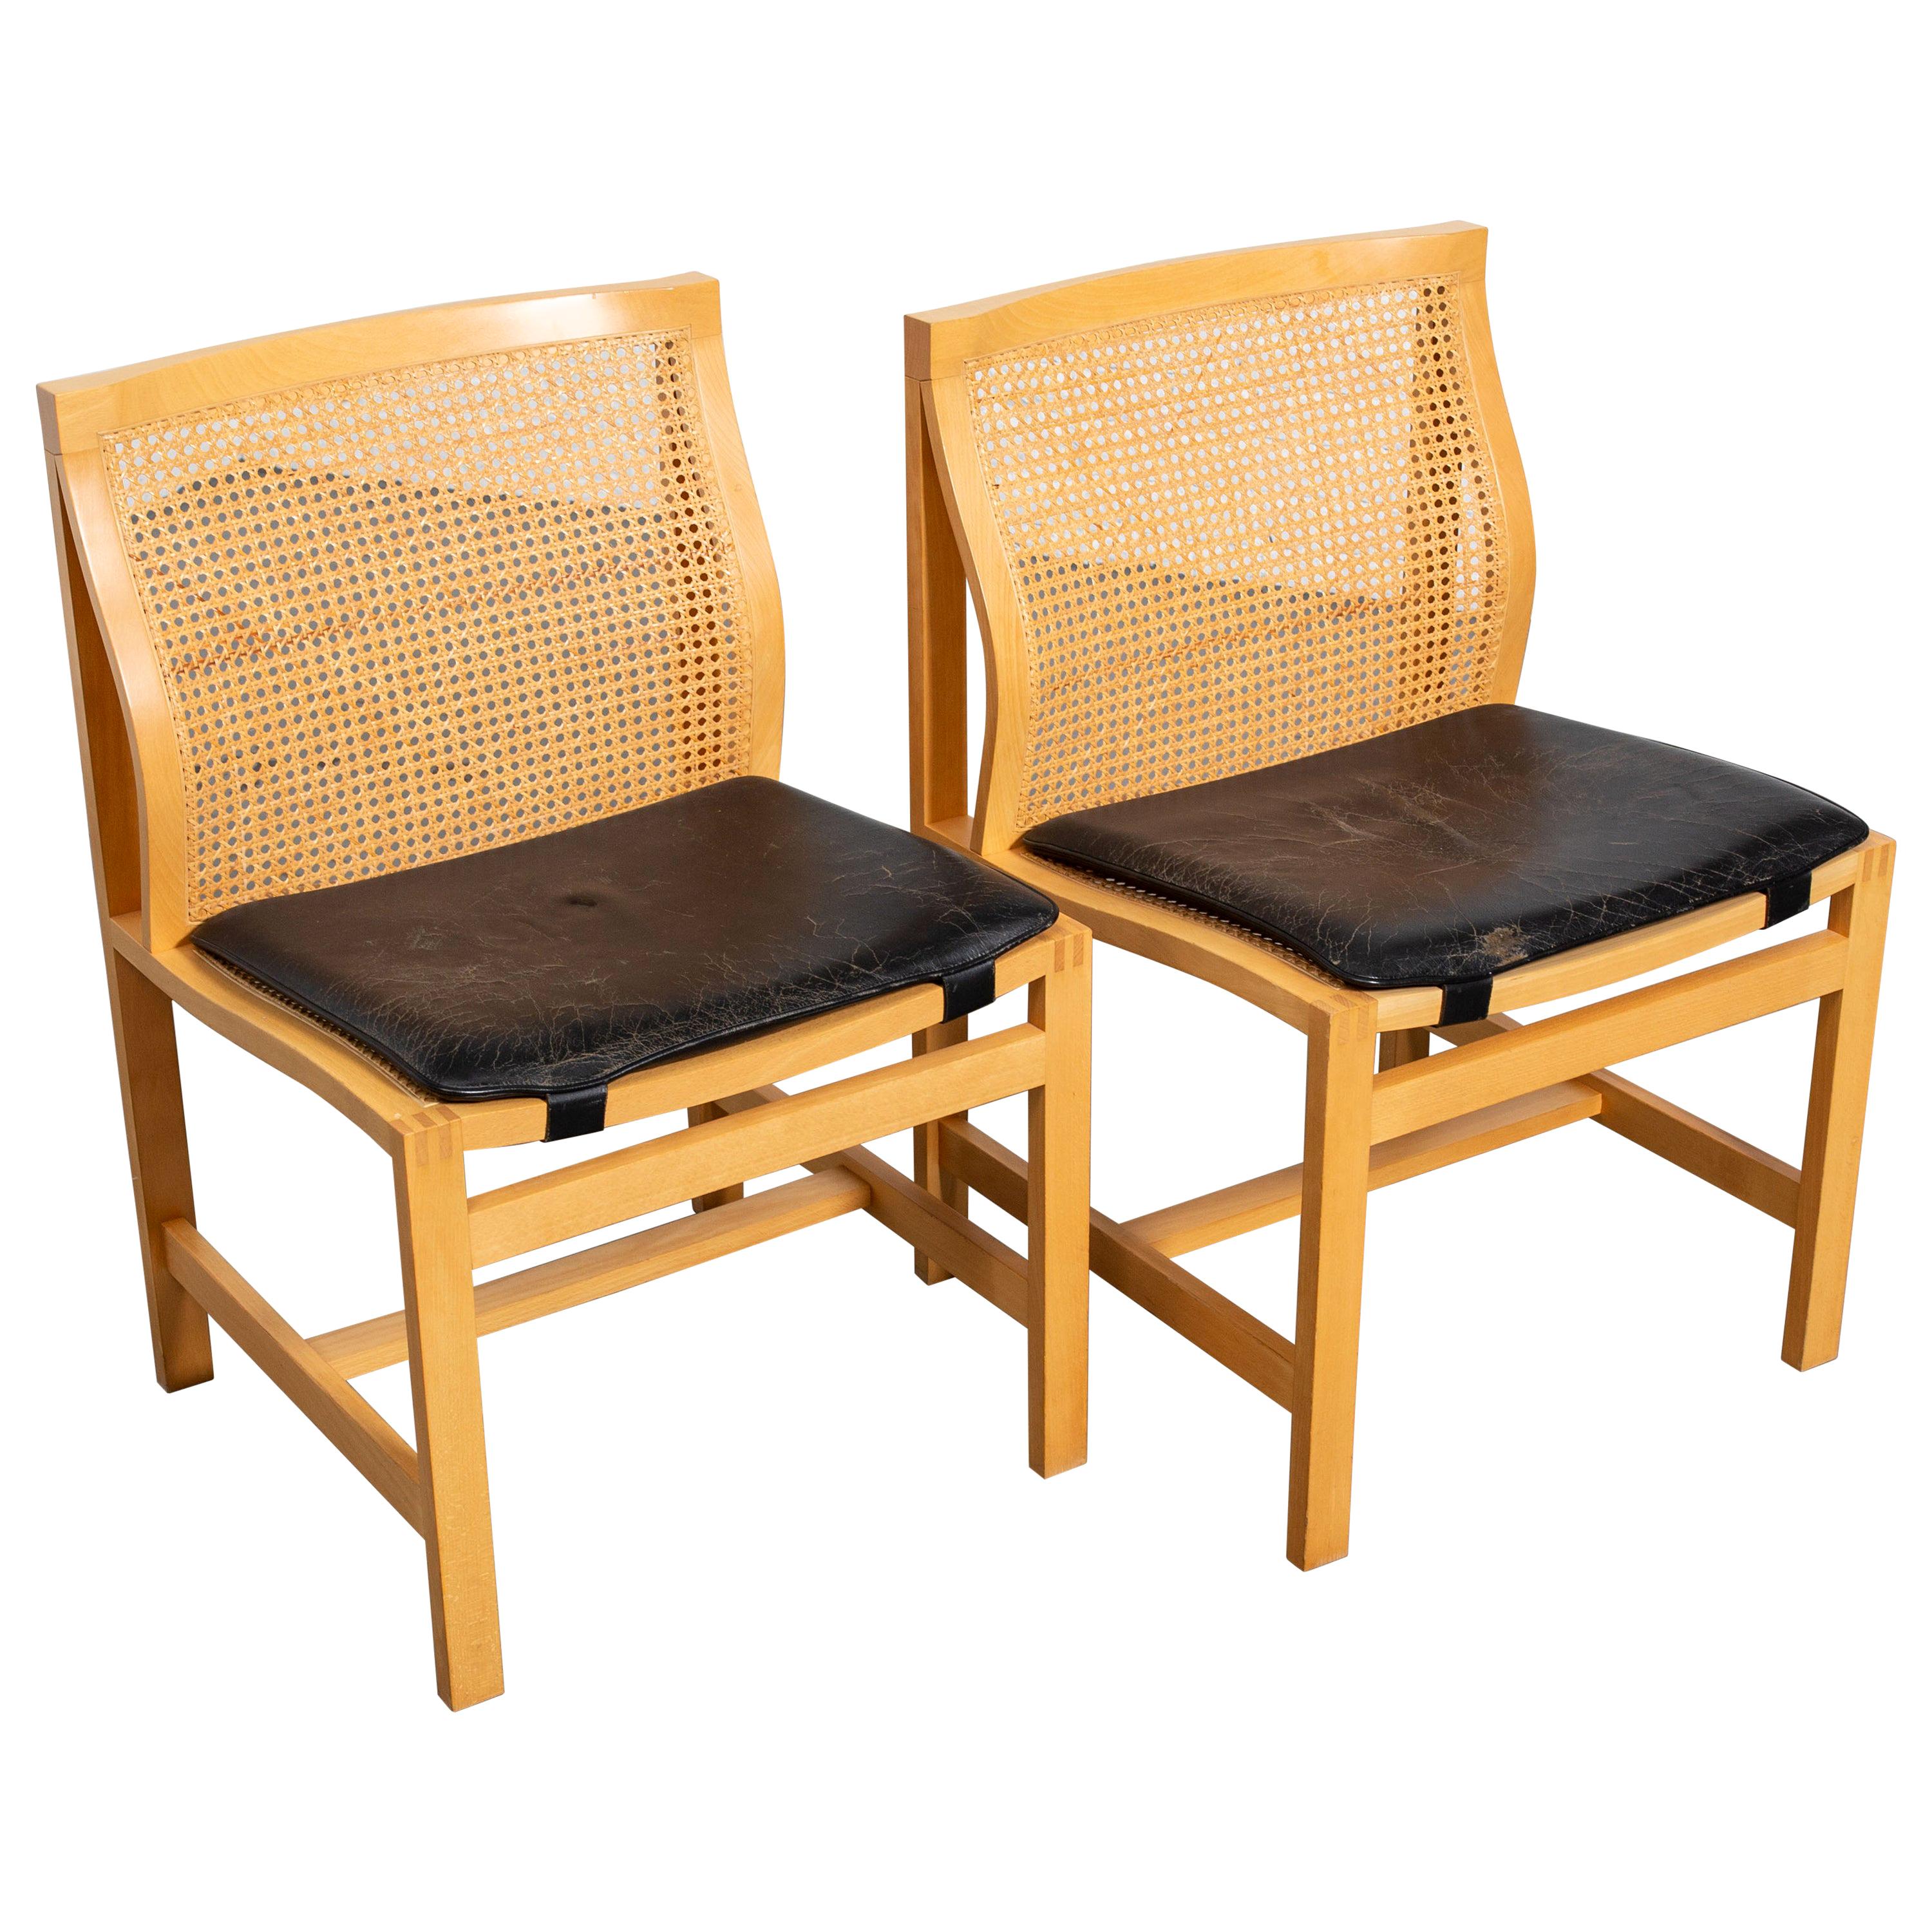 Pair of Rud Thygesen and Johnny Sorensen Cane Back Side Chairs